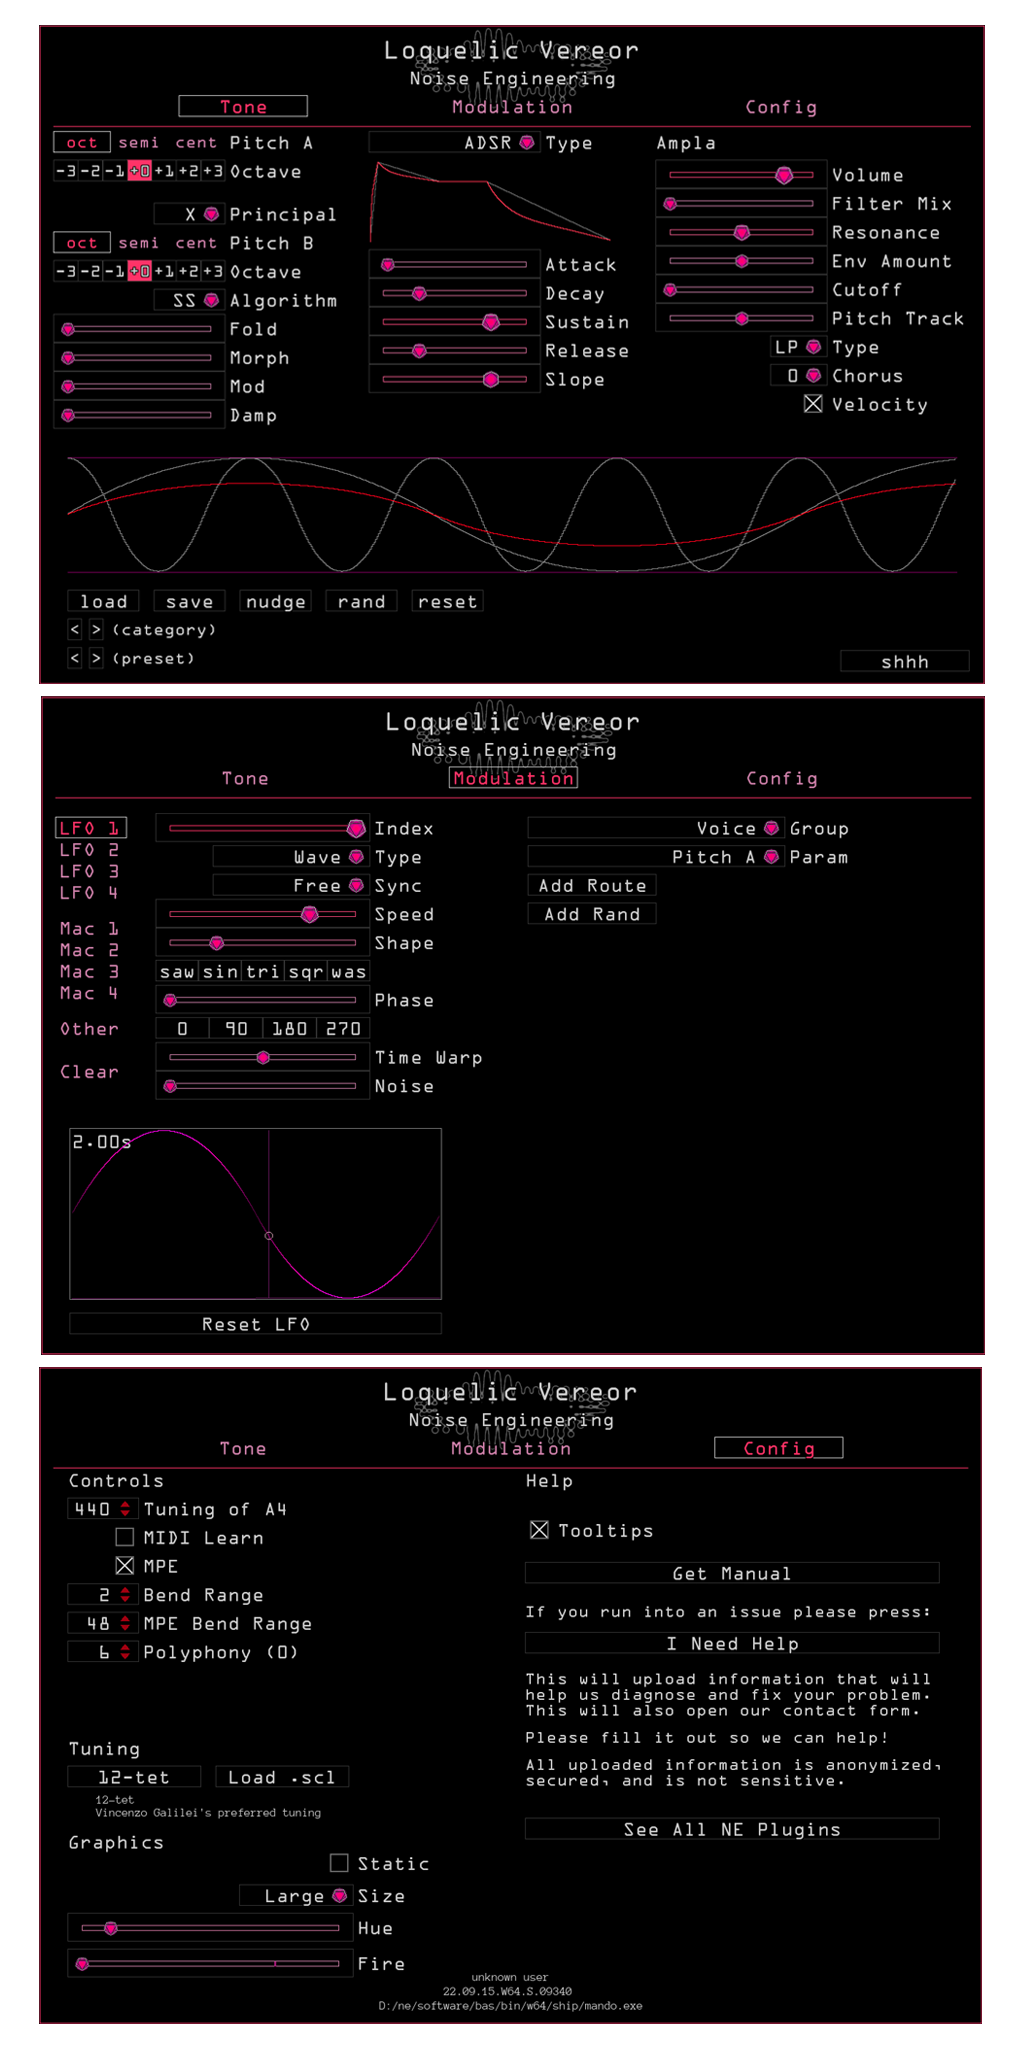 Loquelic Vereor in Pink. The tone page shows the main parameters that set the timbre of the synth. Presets are also controlled here. The Modulation page shows modulation and routing parameters for LFO1. The Configuration page lets you load scala files, set the tuning, polyphony, and bend range, update your graphics preferences (color and fire), and get help and manuals. | Noise Engineering